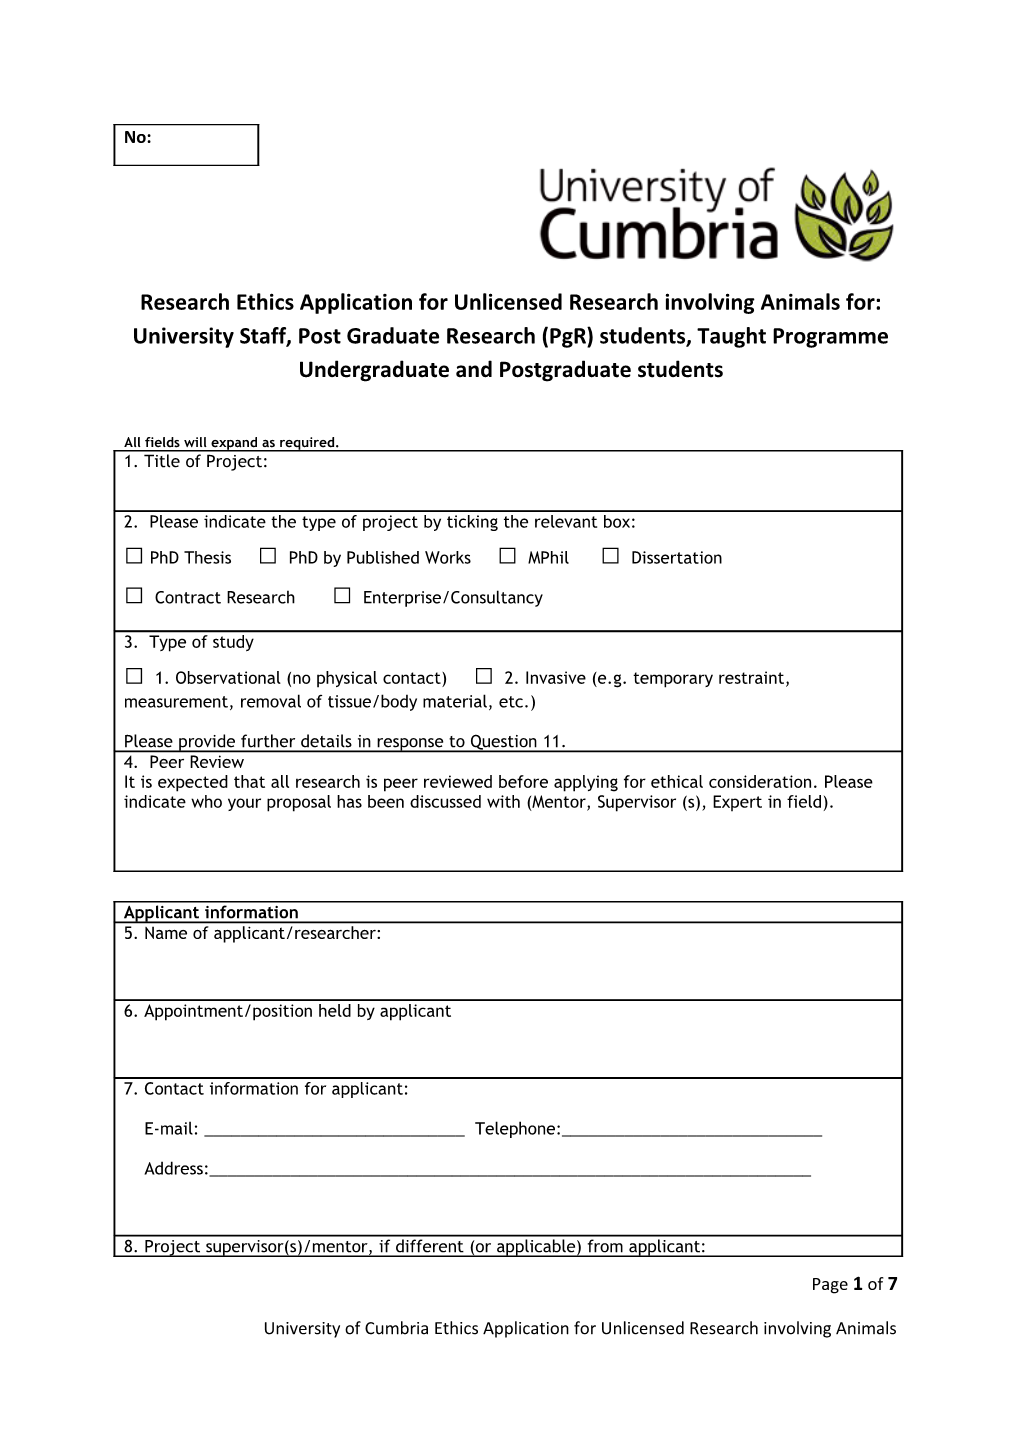 Research Ethics Application Form E4 Animals